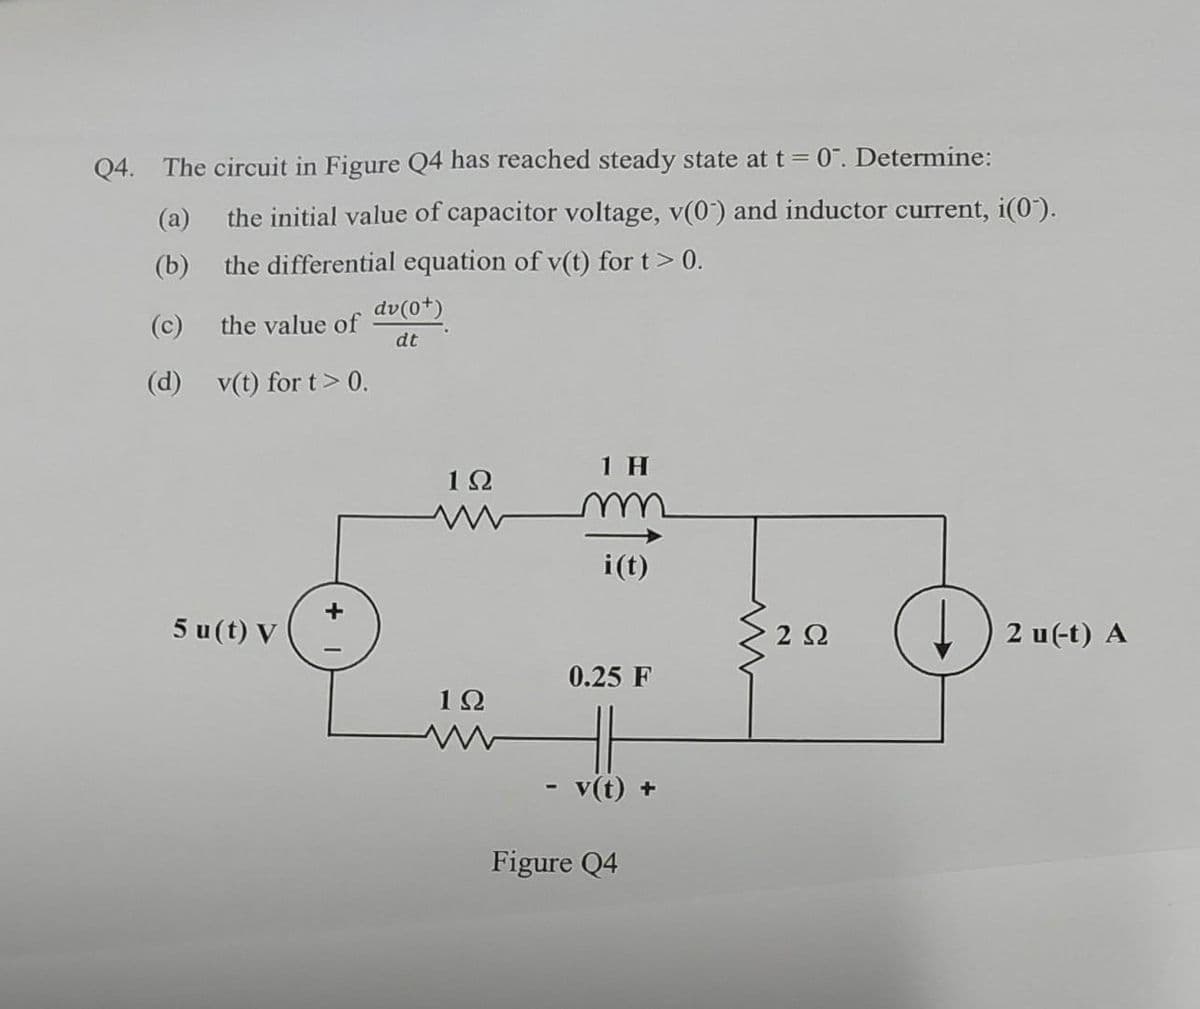 Q4. The circuit in Figure Q4 has reached steady state at t = 0. Determine:
(a)
the initial value of capacitor voltage, v(0) and inductor current, i(0).
(b)
the differential equation of v(t) for t > 0.
(c)
the value of
(d) v(t) for t> 0.
5 u(t) V
dv(0+)
dt
1Ω
1Ω
1 H
i(t)
0.25 F
v(t) +
Figure Q4
202
D
2 u(-t) A